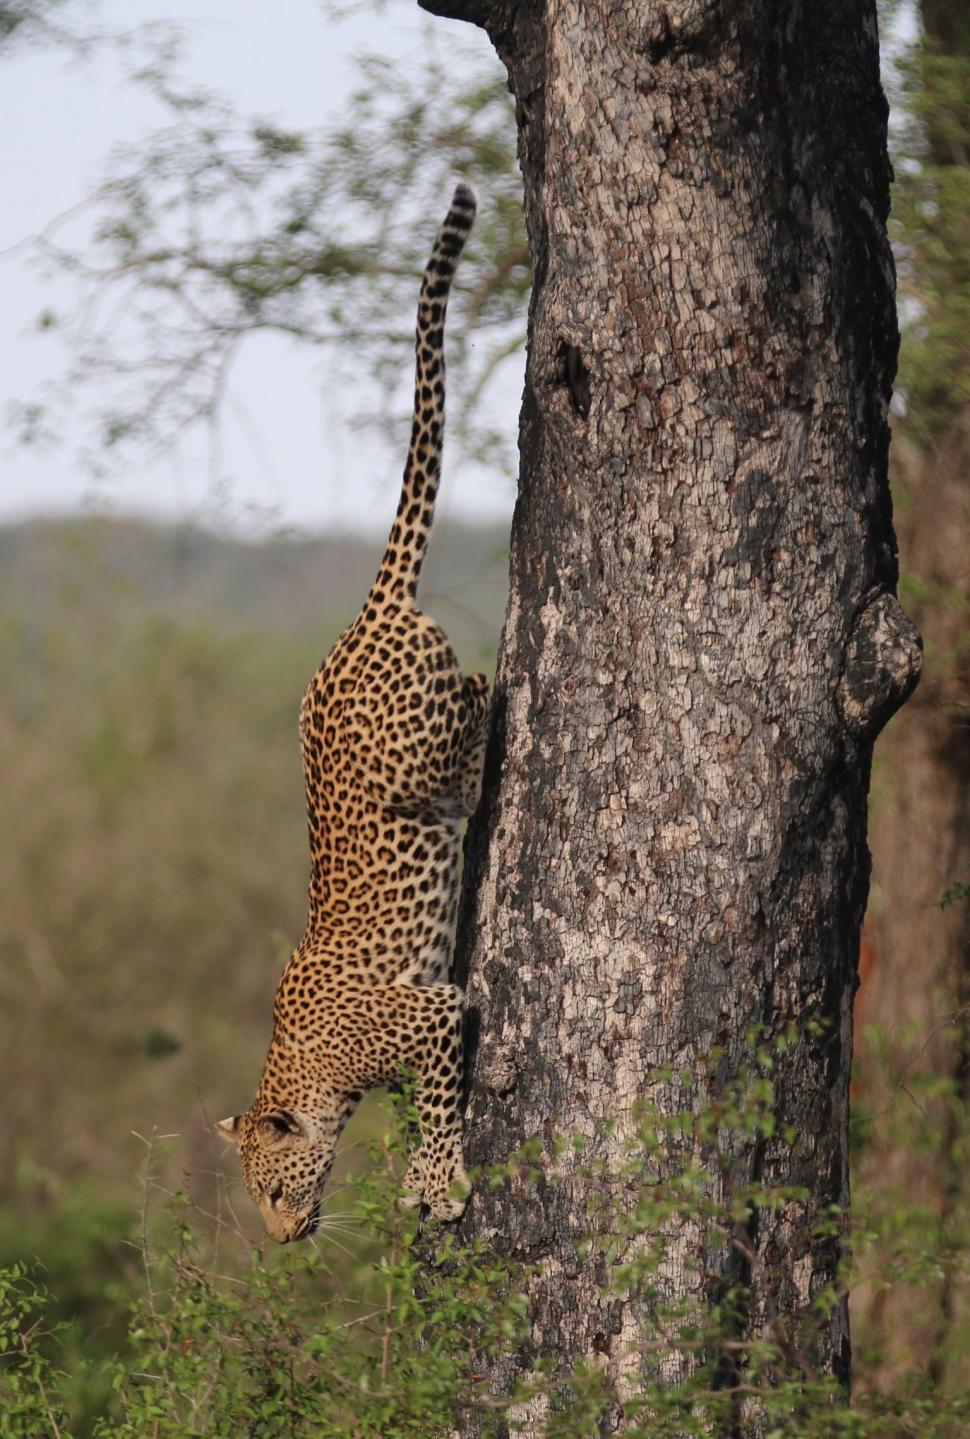 Free Image of Leopard Climbing Up Tree 